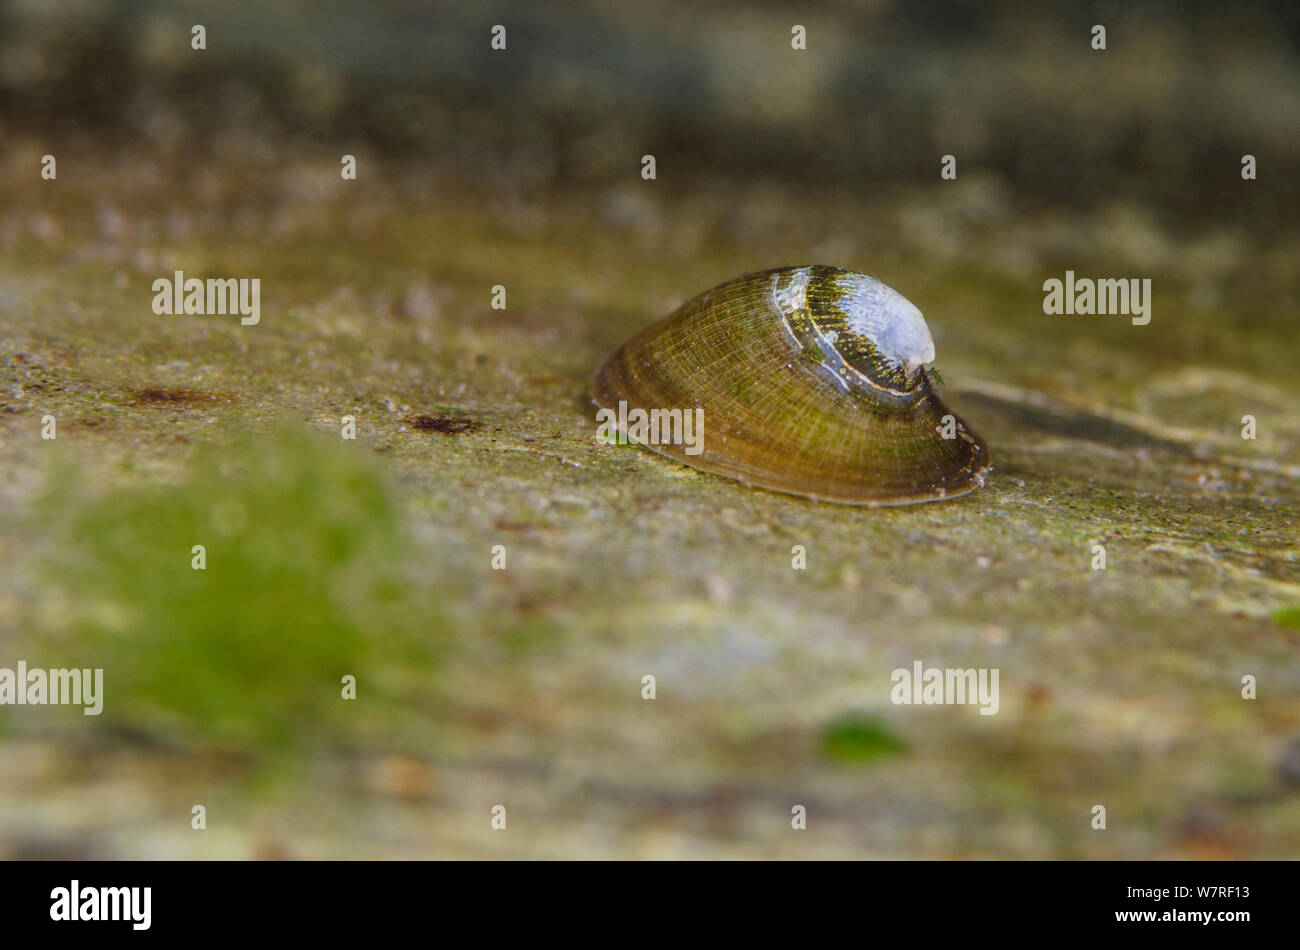 Freshwater limpet (Ancylus fluviatilis) in a river. This species actually is more closely related to horned snails than marine limpets and can breath air. River Flumendosa, Gennargentu National Park, Sardinia, Italy. Stock Photo